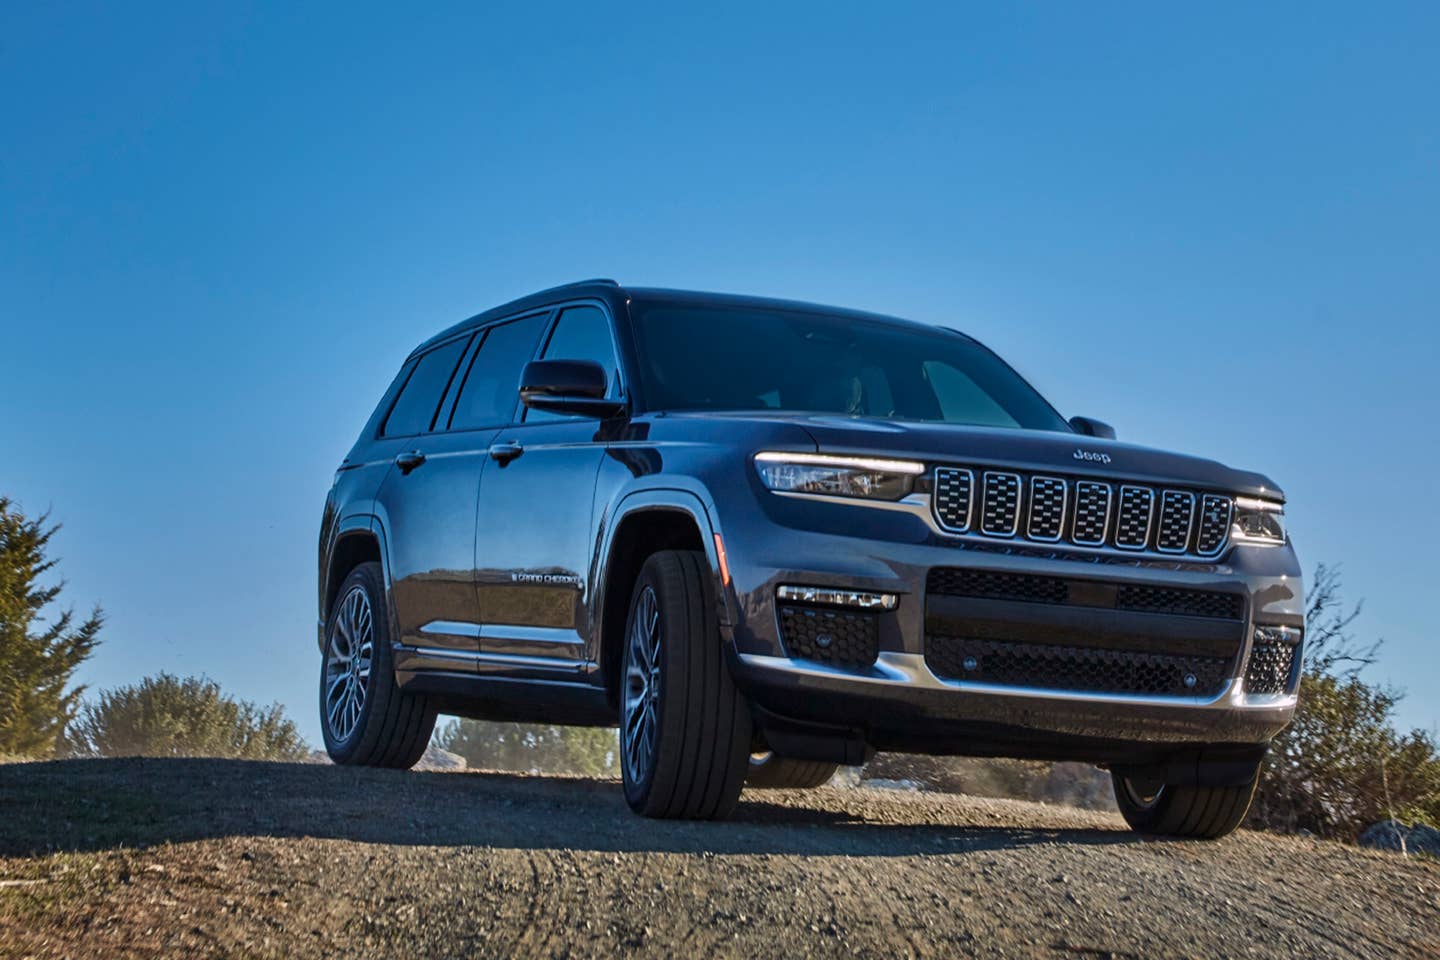 2021 Jeep Grand Cherokee L Review: Late But Great